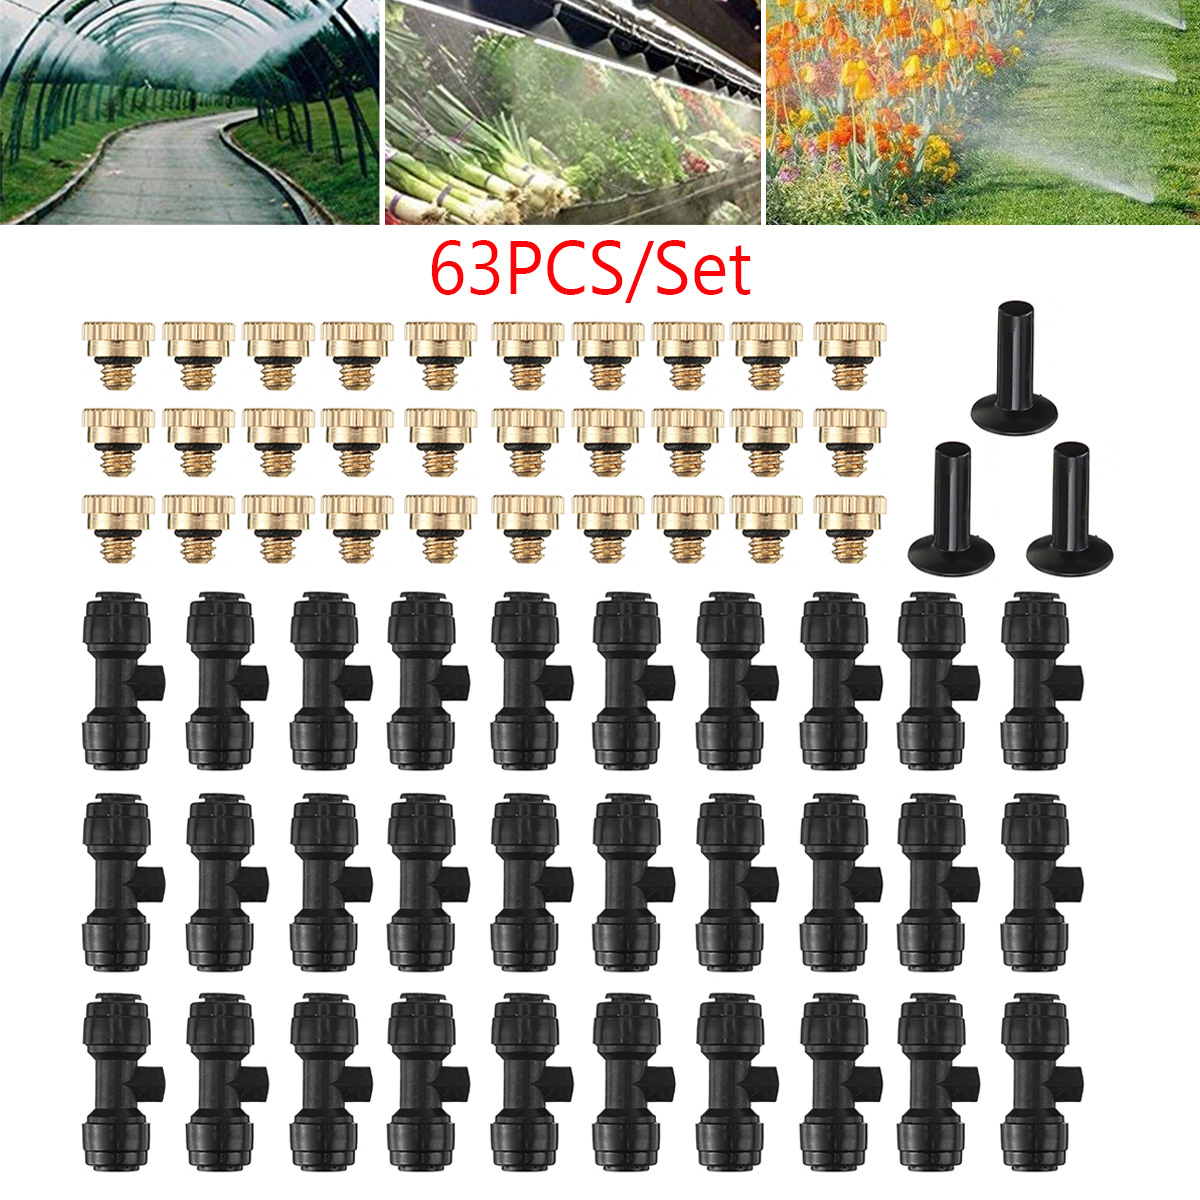 Retractable-Coil-Garden-Hose-Pipe-Expandable-Reel-Spray-System-Tap-Connector-30m-1695084